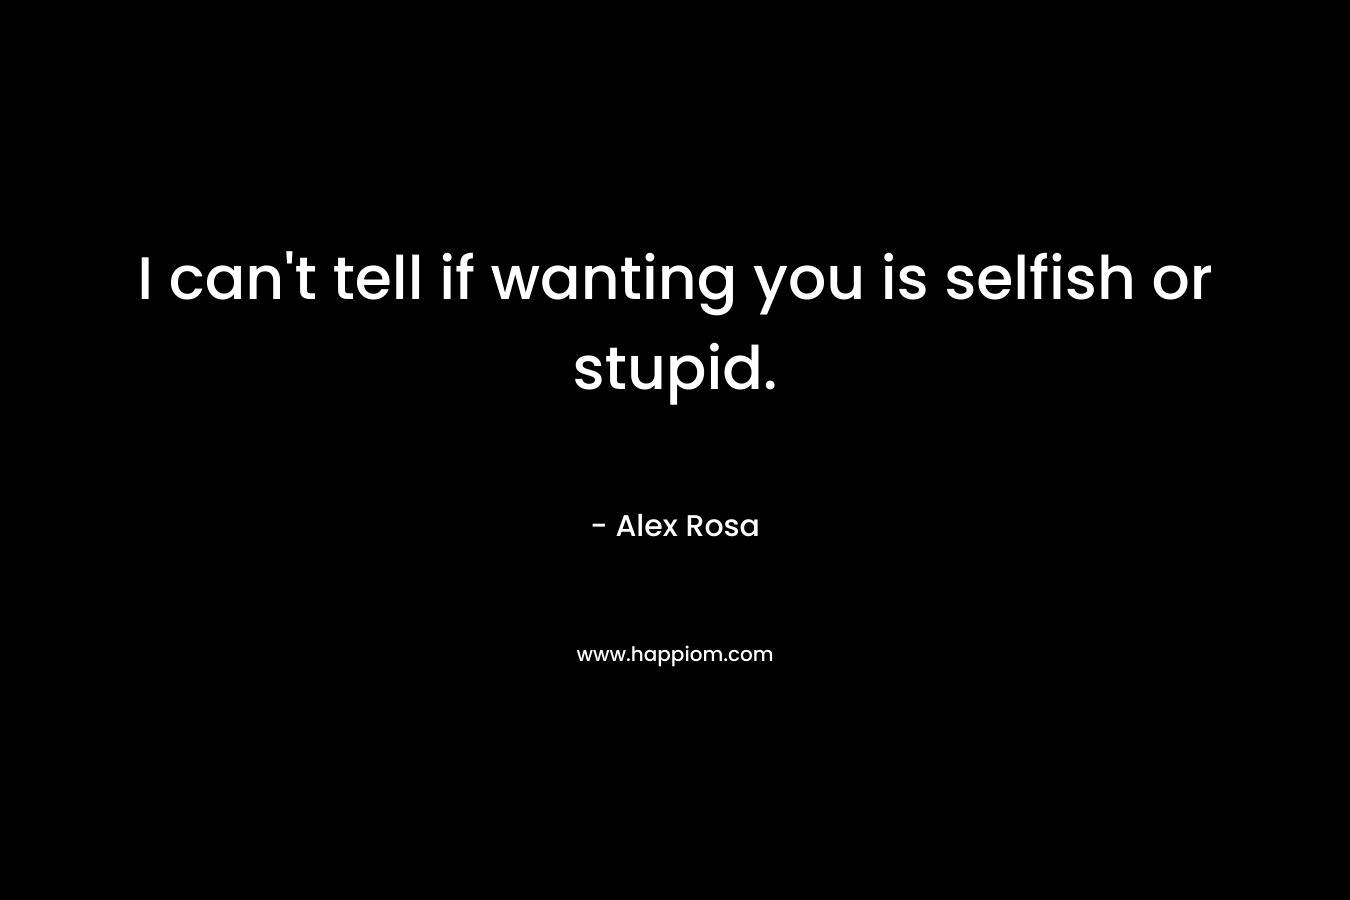 I can’t tell if wanting you is selfish or stupid. – Alex Rosa